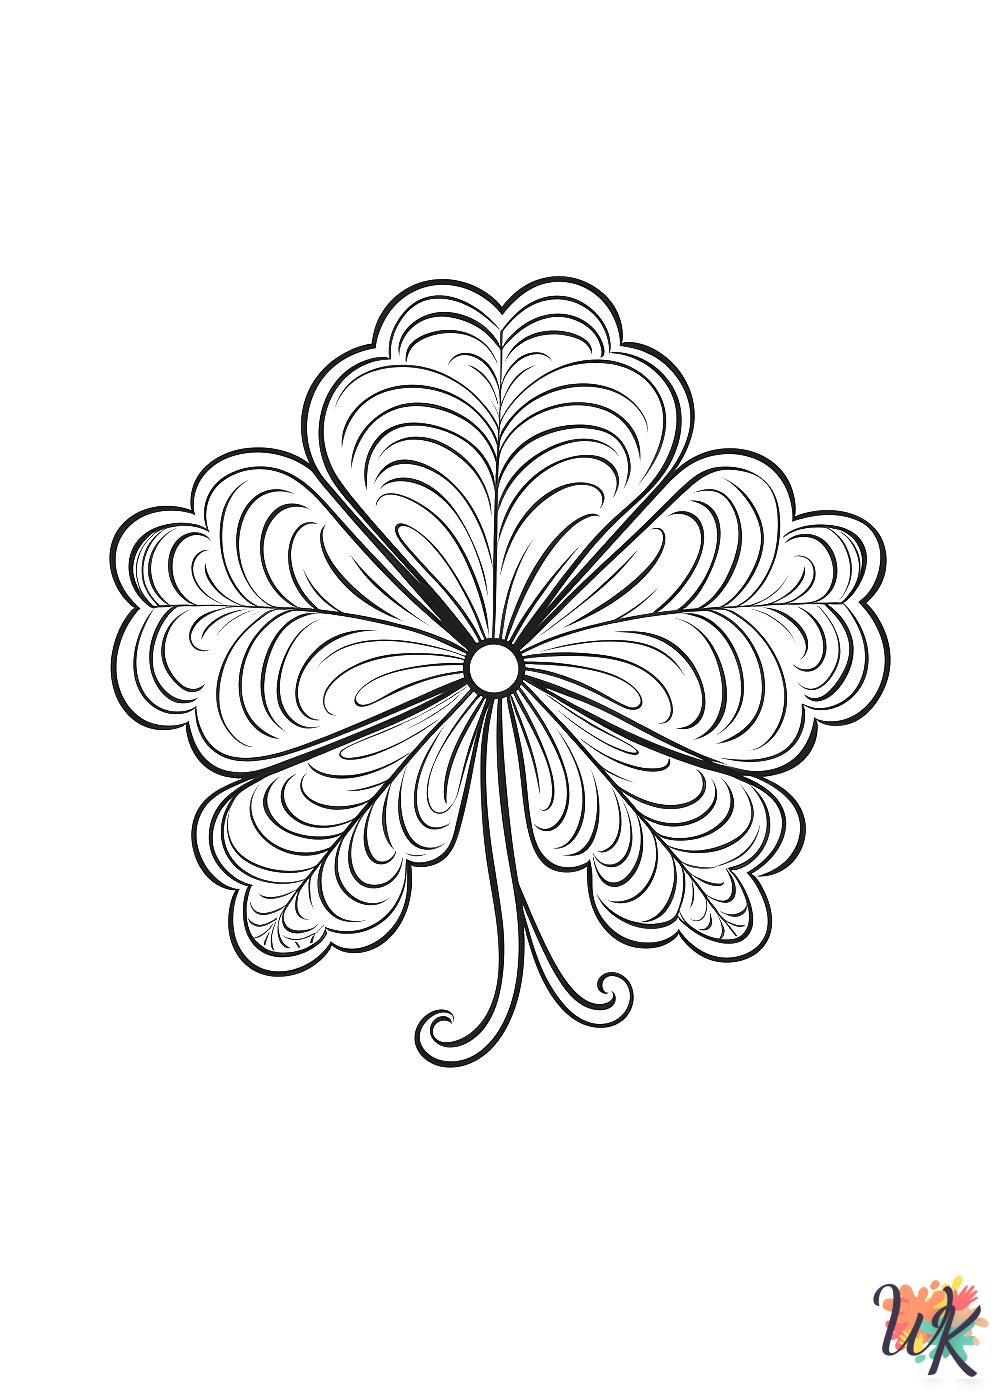 Shamrock coloring pages free